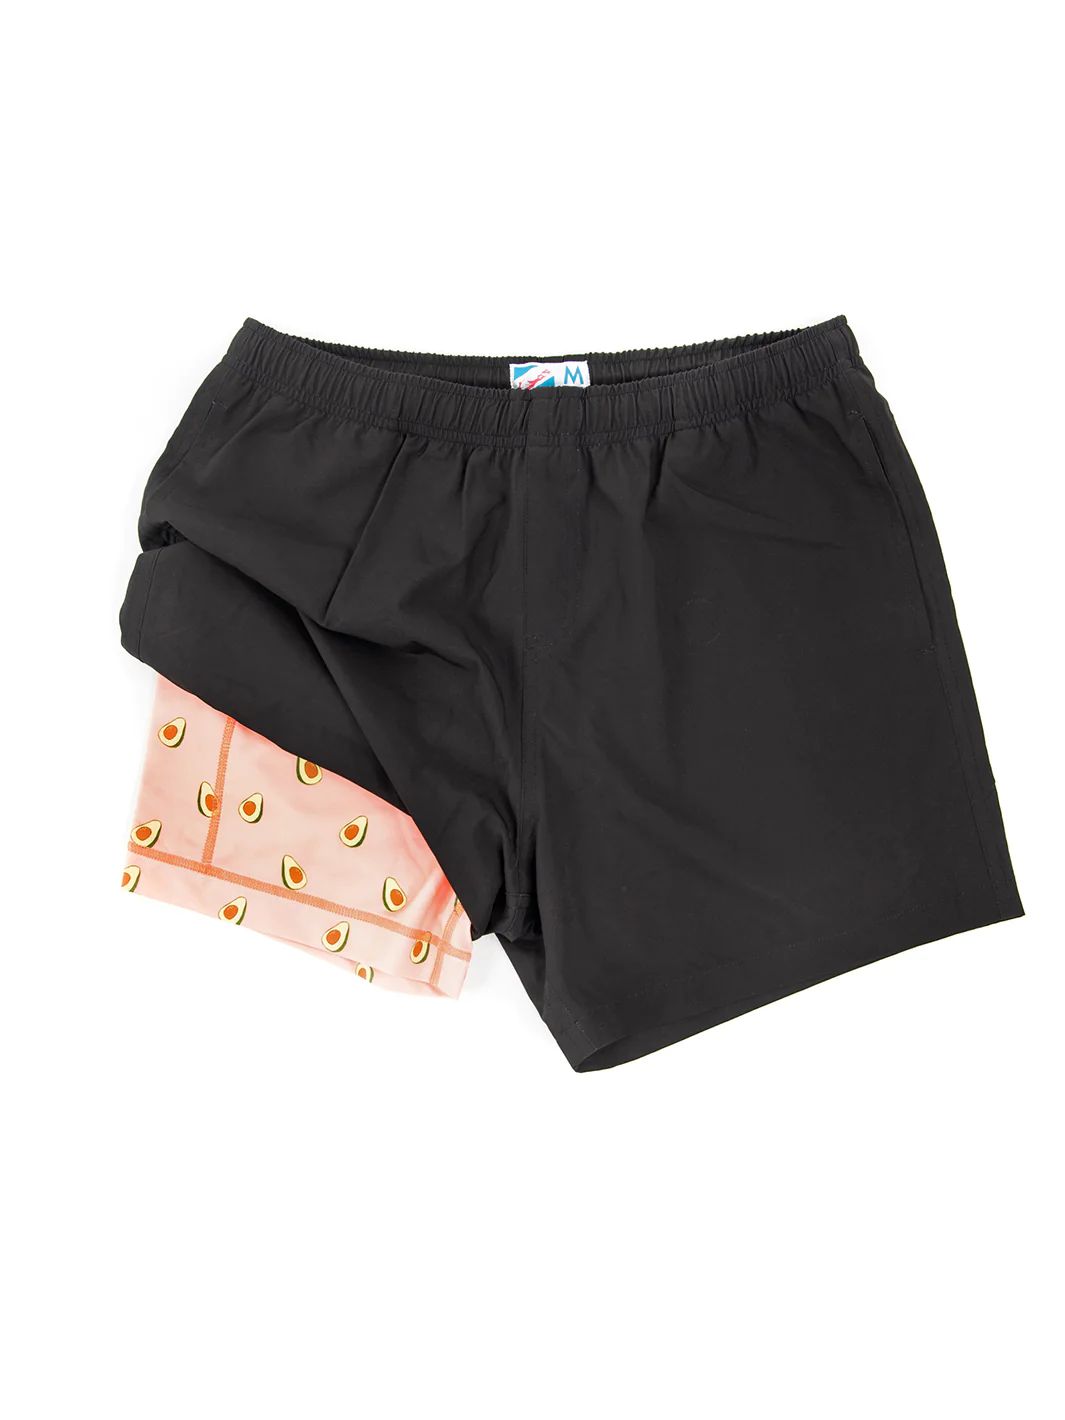 Bermies Men's Avocado Print Lined Workout Shorts in Black Medium Lord & Taylor | Lord & Taylor